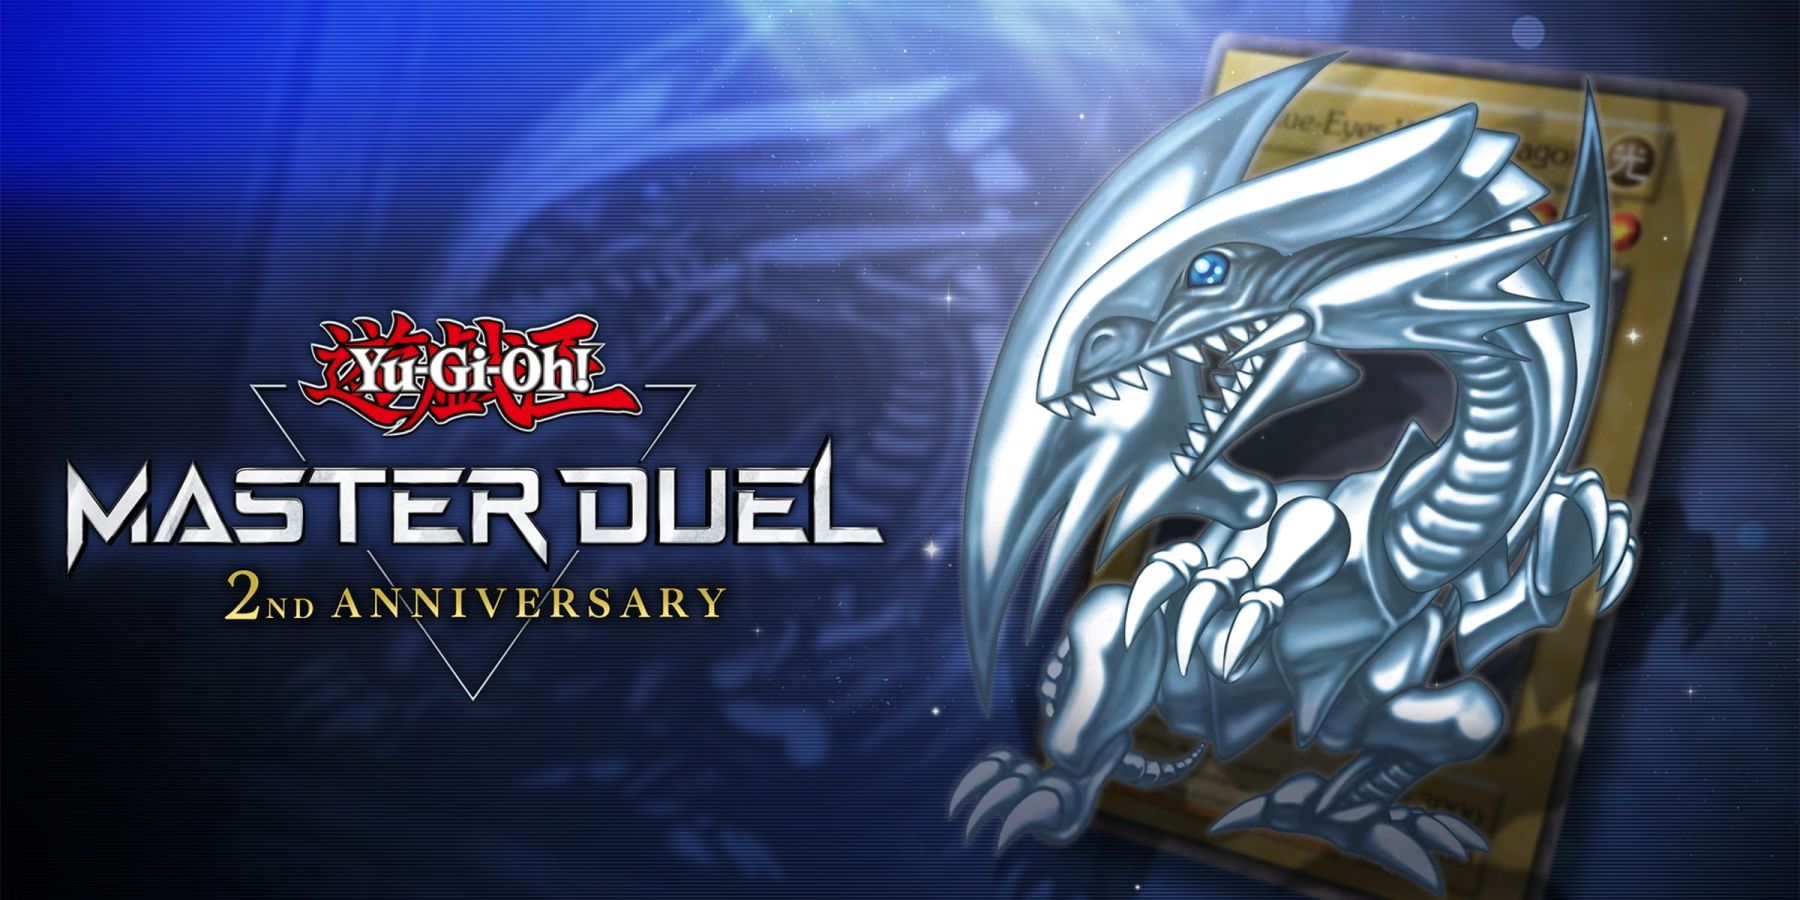 A promotional image for Yu-Gi-Oh Master Duel's second anniversary featuring the Blue-Eyes White Dragon.